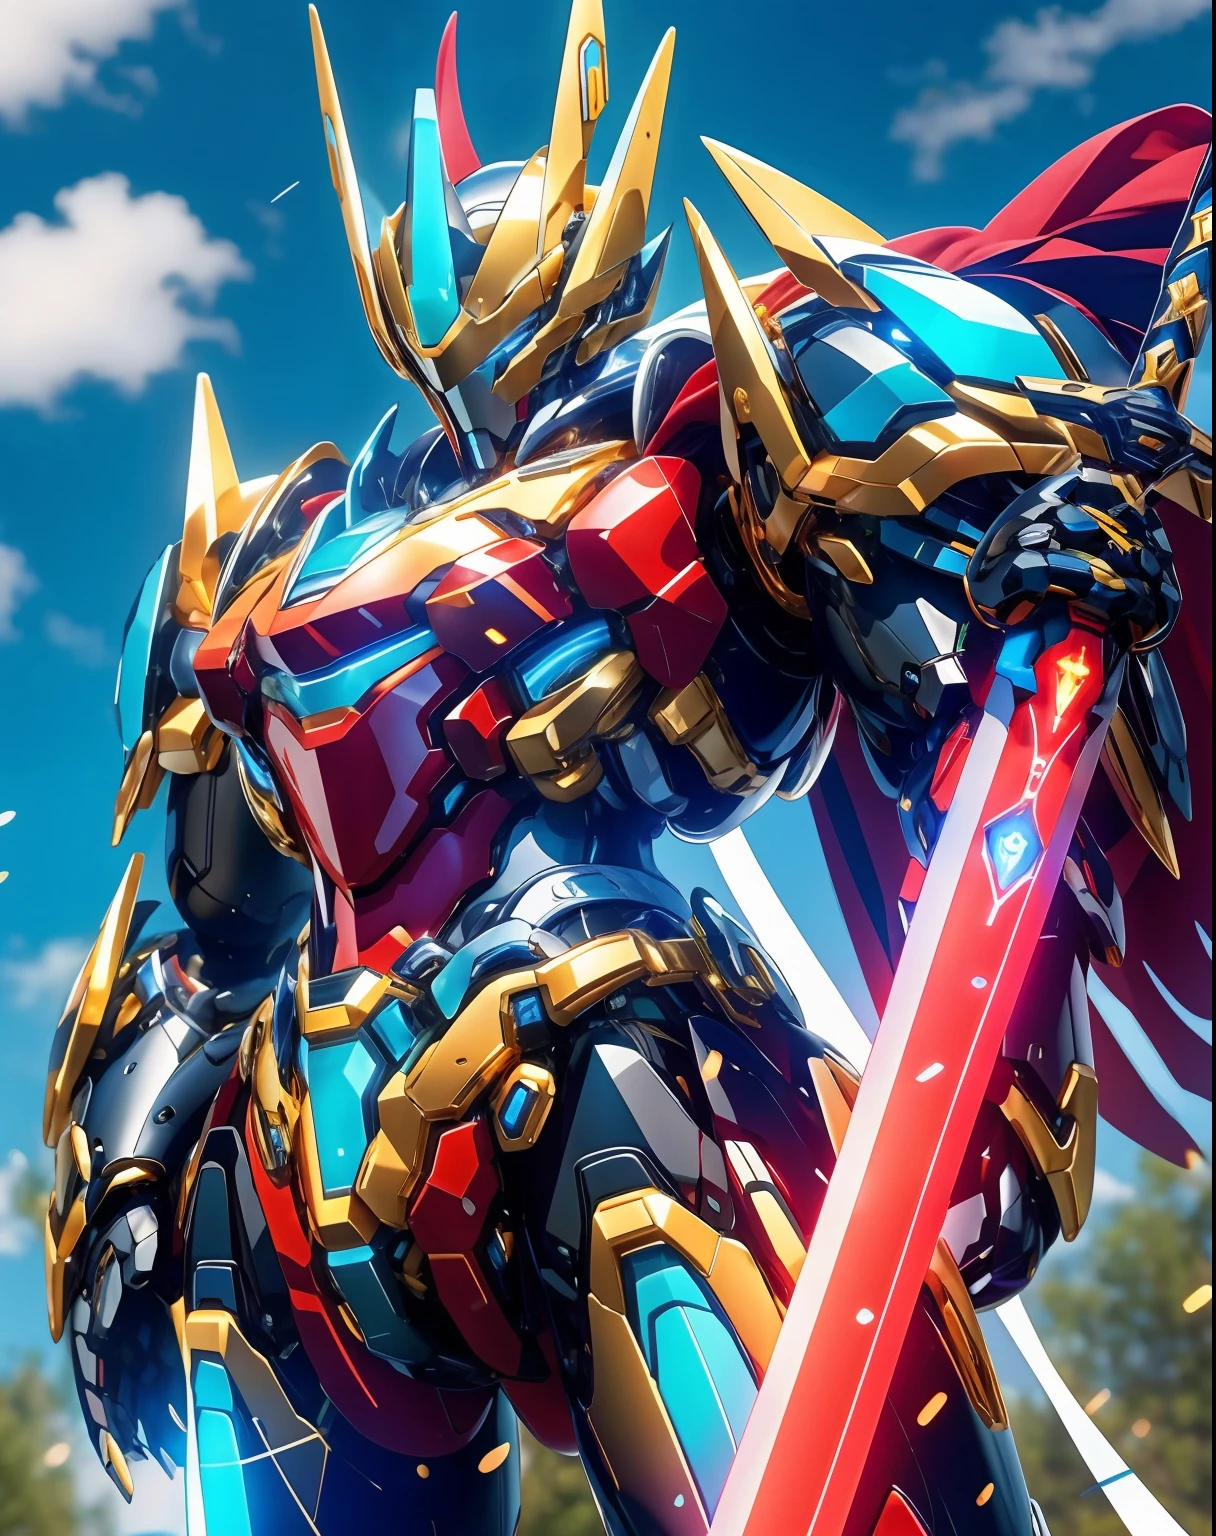 (Realism, photo realism: 1.3), (lens focal length: 35mm), backlight, a knight's mechanical armor, luxurious and exquisite shape, a blue glowing cross carved on the chest of the mecha, the mecha holds a red glowing wide and heavy armor sword, the red scarf sways in the wind, the knight's eyes are red flame light, and the battle posture is drawn